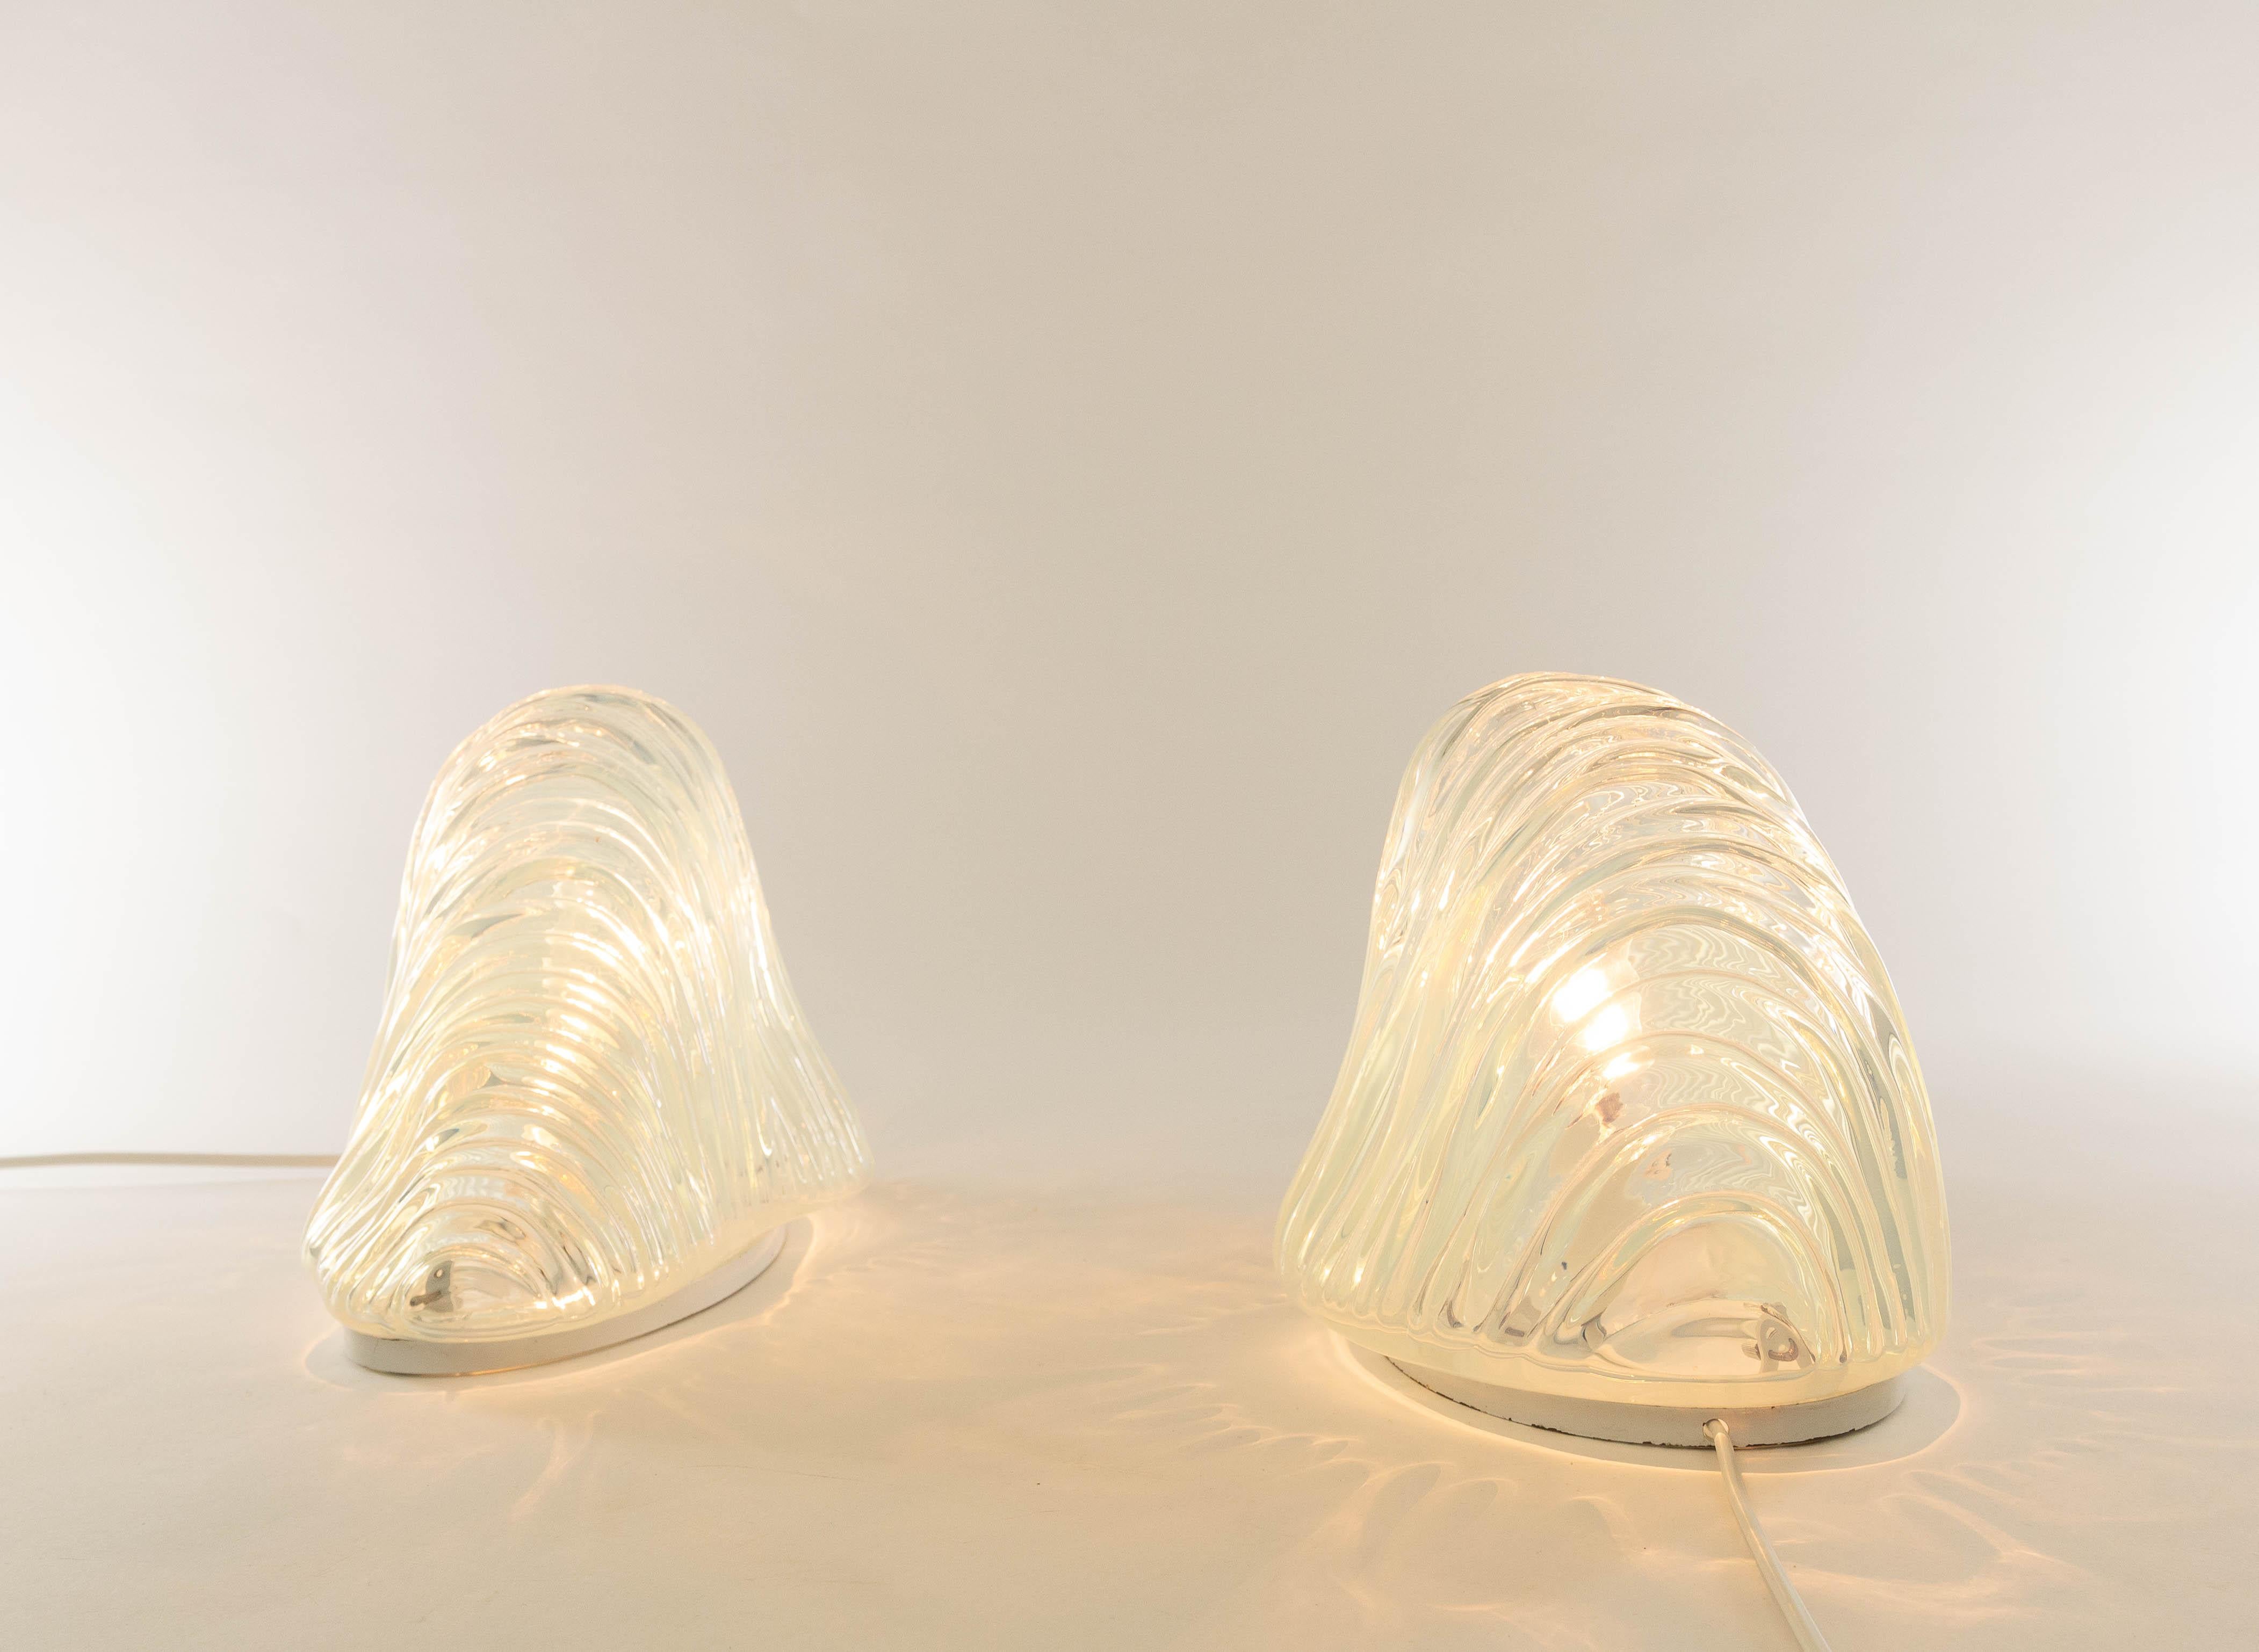 Original pair of iceberg table lamps or model LT 301 designed by Carlo Nason in the 1960s for A.V. Mazzega.

These table lamps are made of curved Murano glass that provides a wonderful light effect. The lacquered metal bases include E14